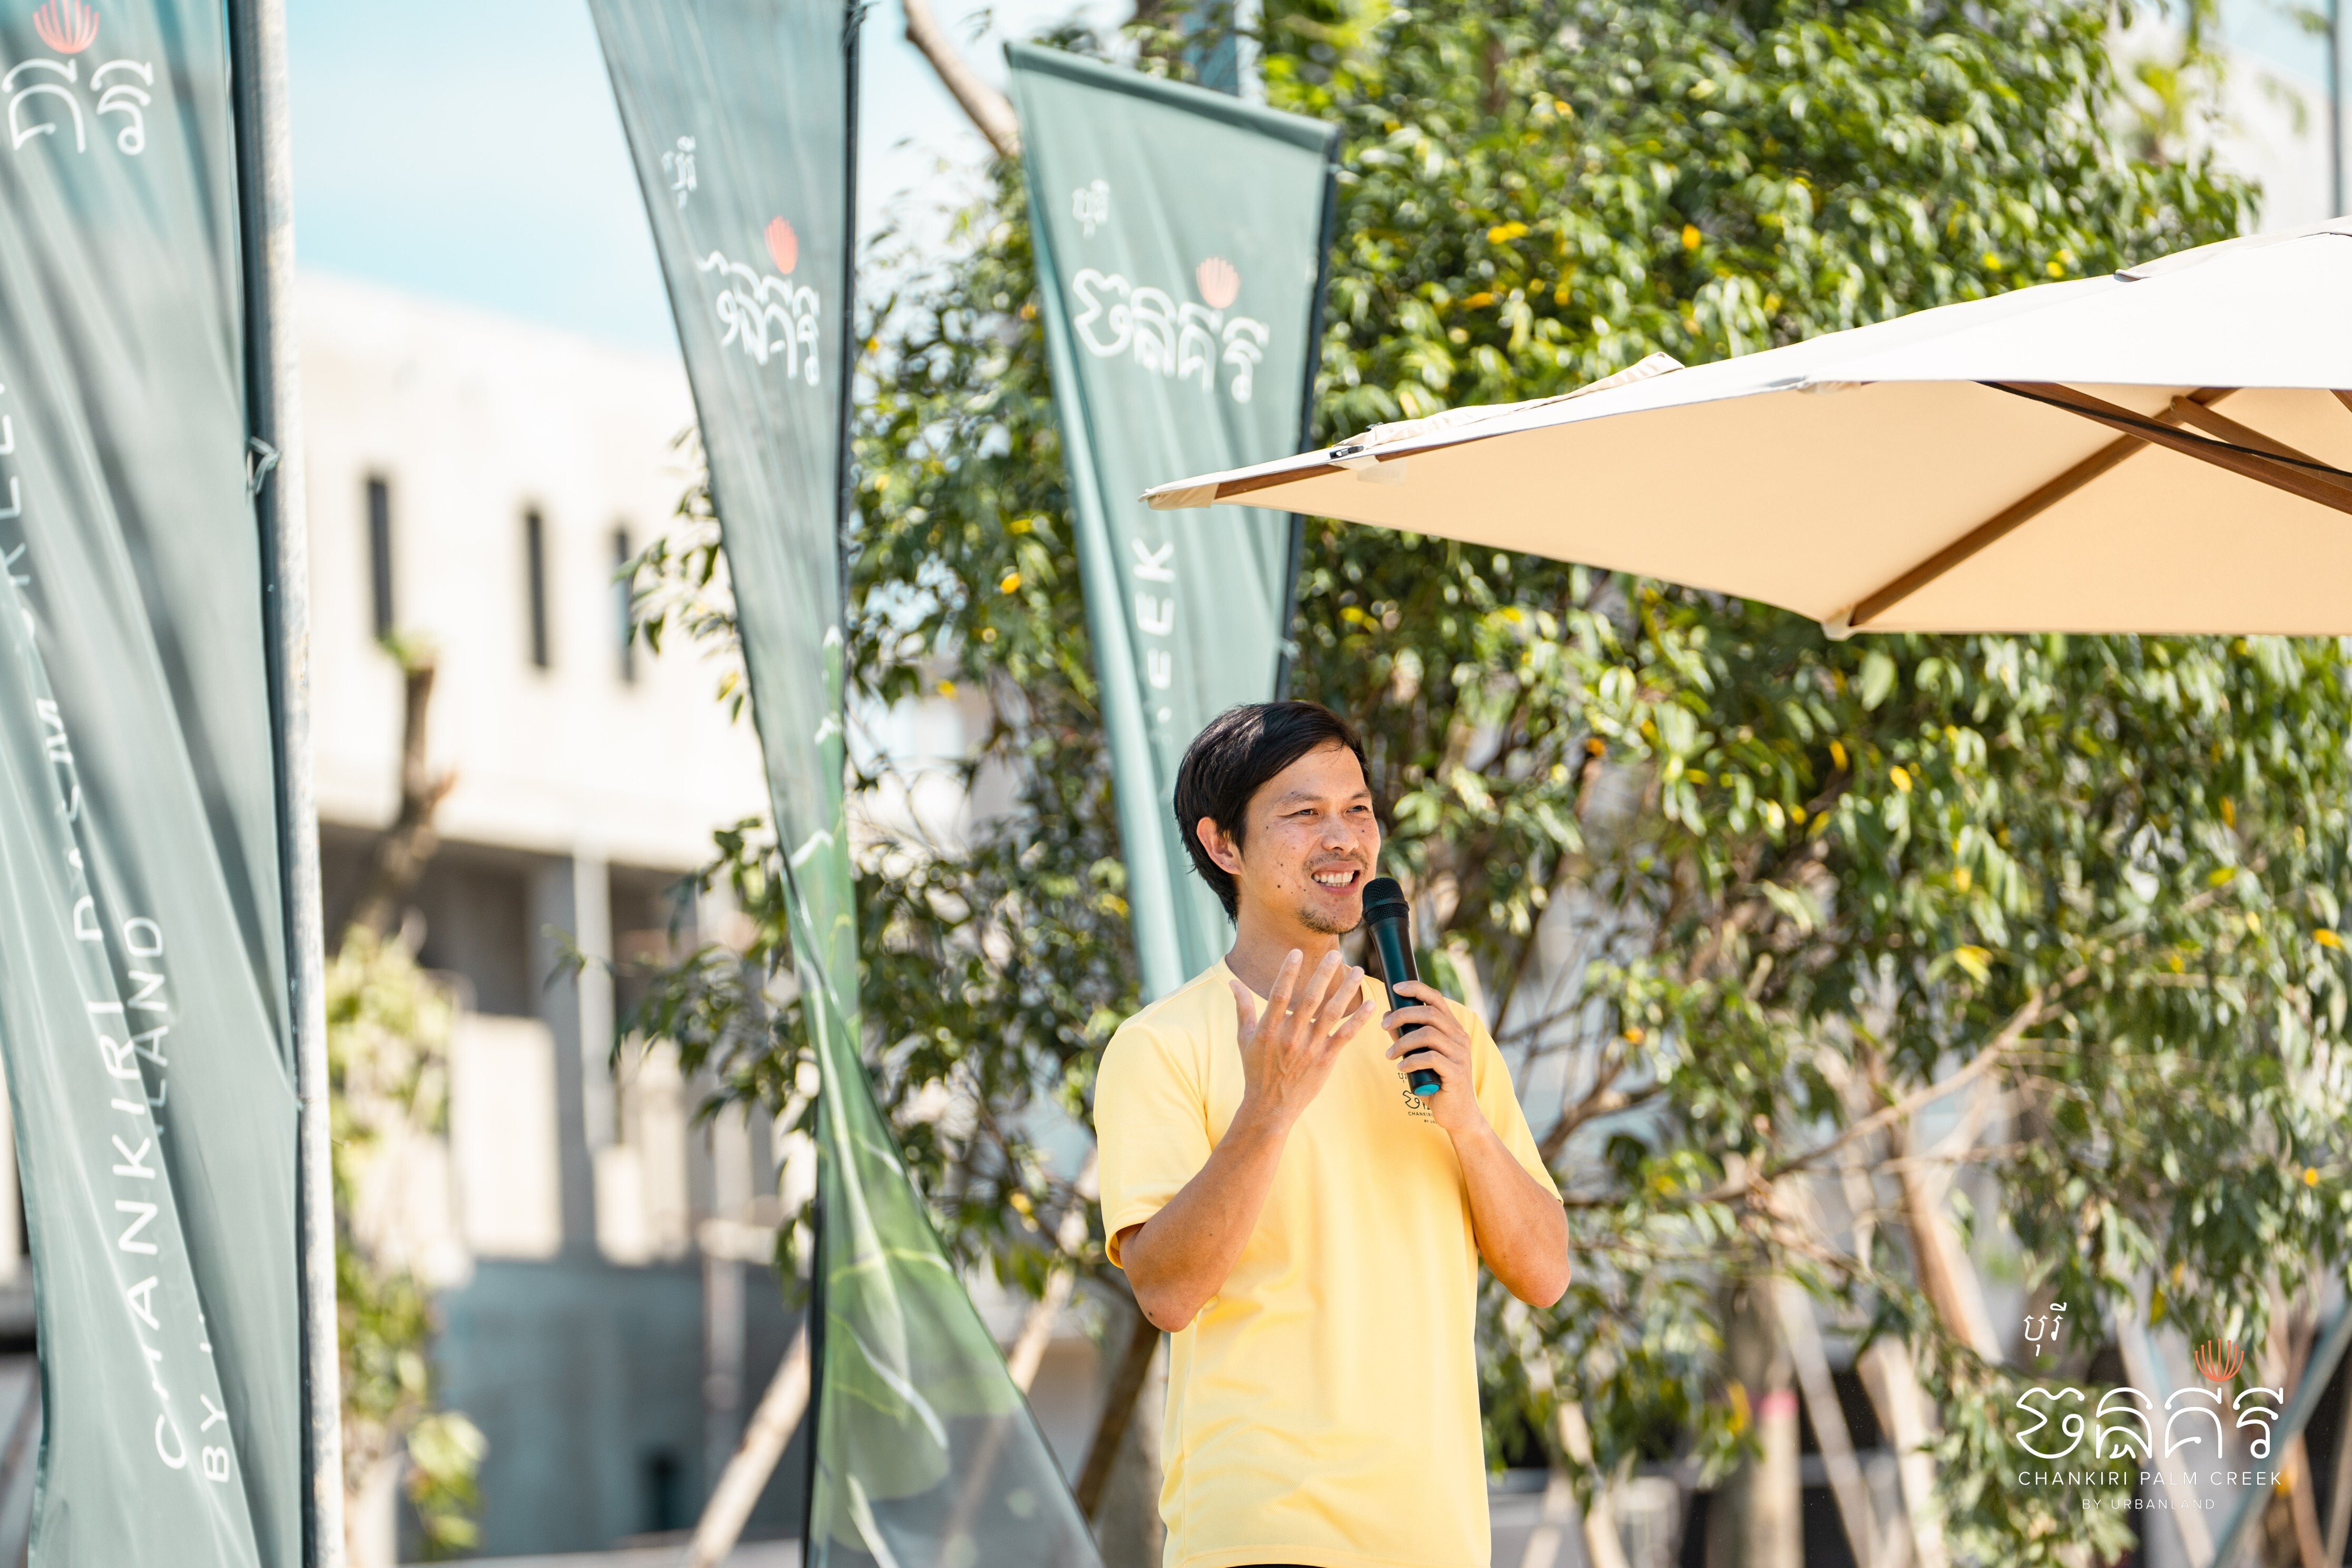 CEO Hok Kang delivered a speech to Chankiri homeowners about the objectives of the event including features of the master plan